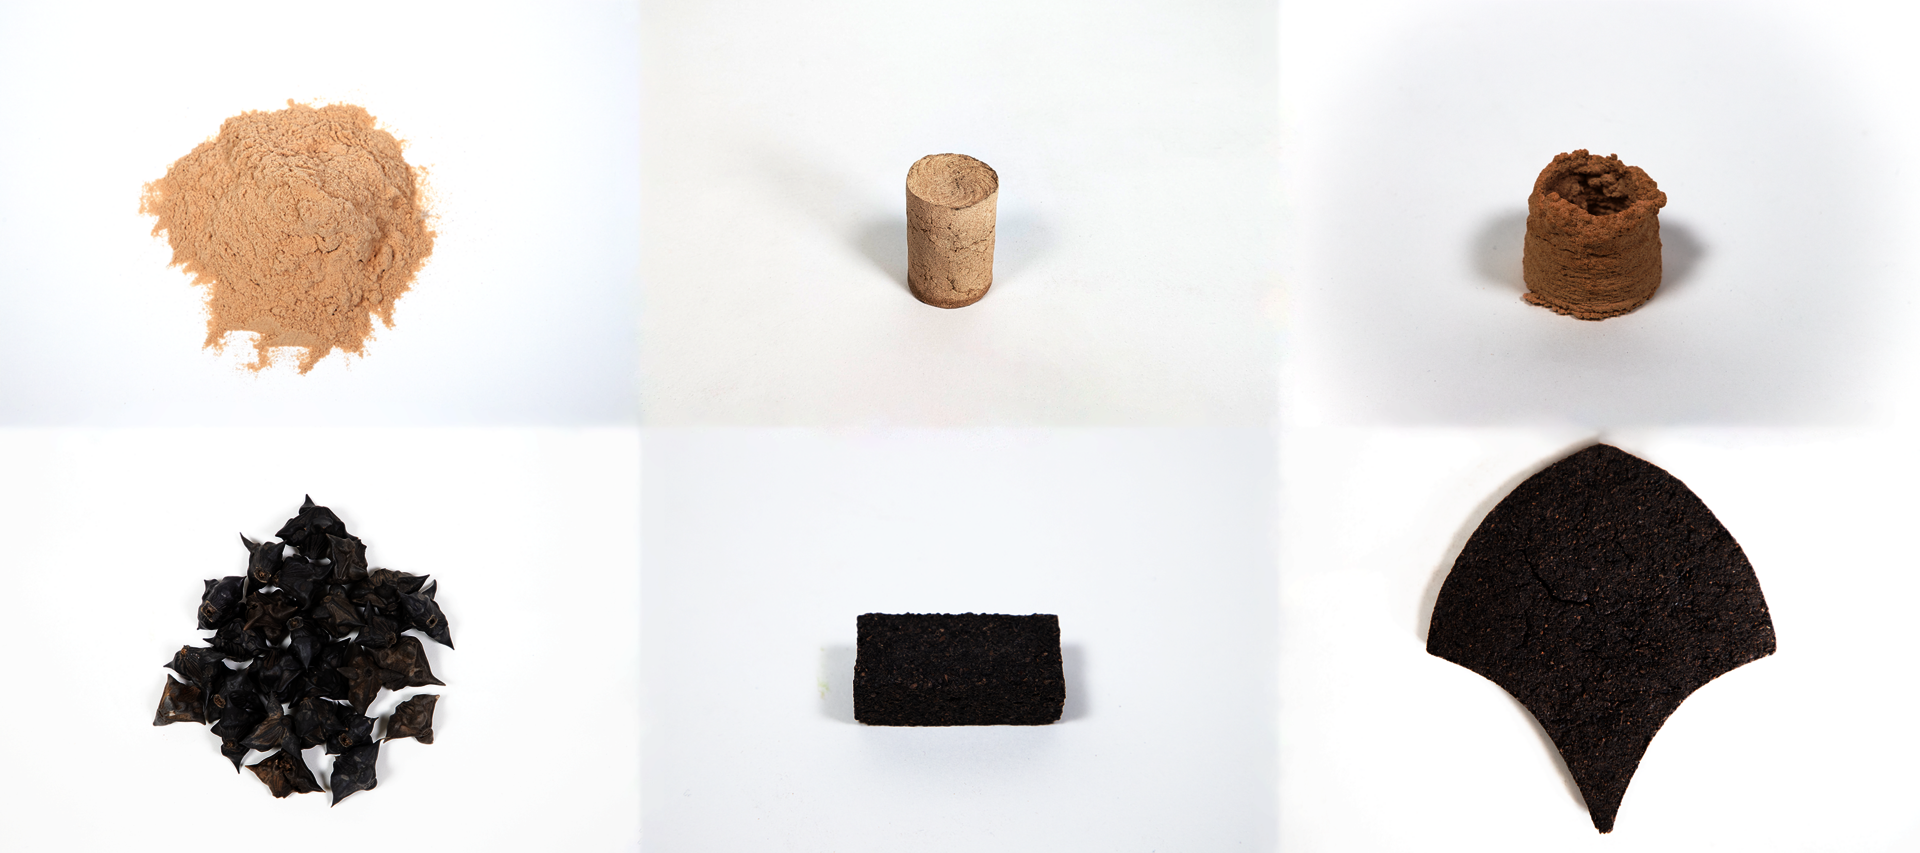 Left to right, first row: sawdust powder, a cylindar of sawdust-based material, a 3D printed small structure. Second row: Water Chestnut pods, a water chestnut-based brick, a water chestnut leaf-shaped tile. 